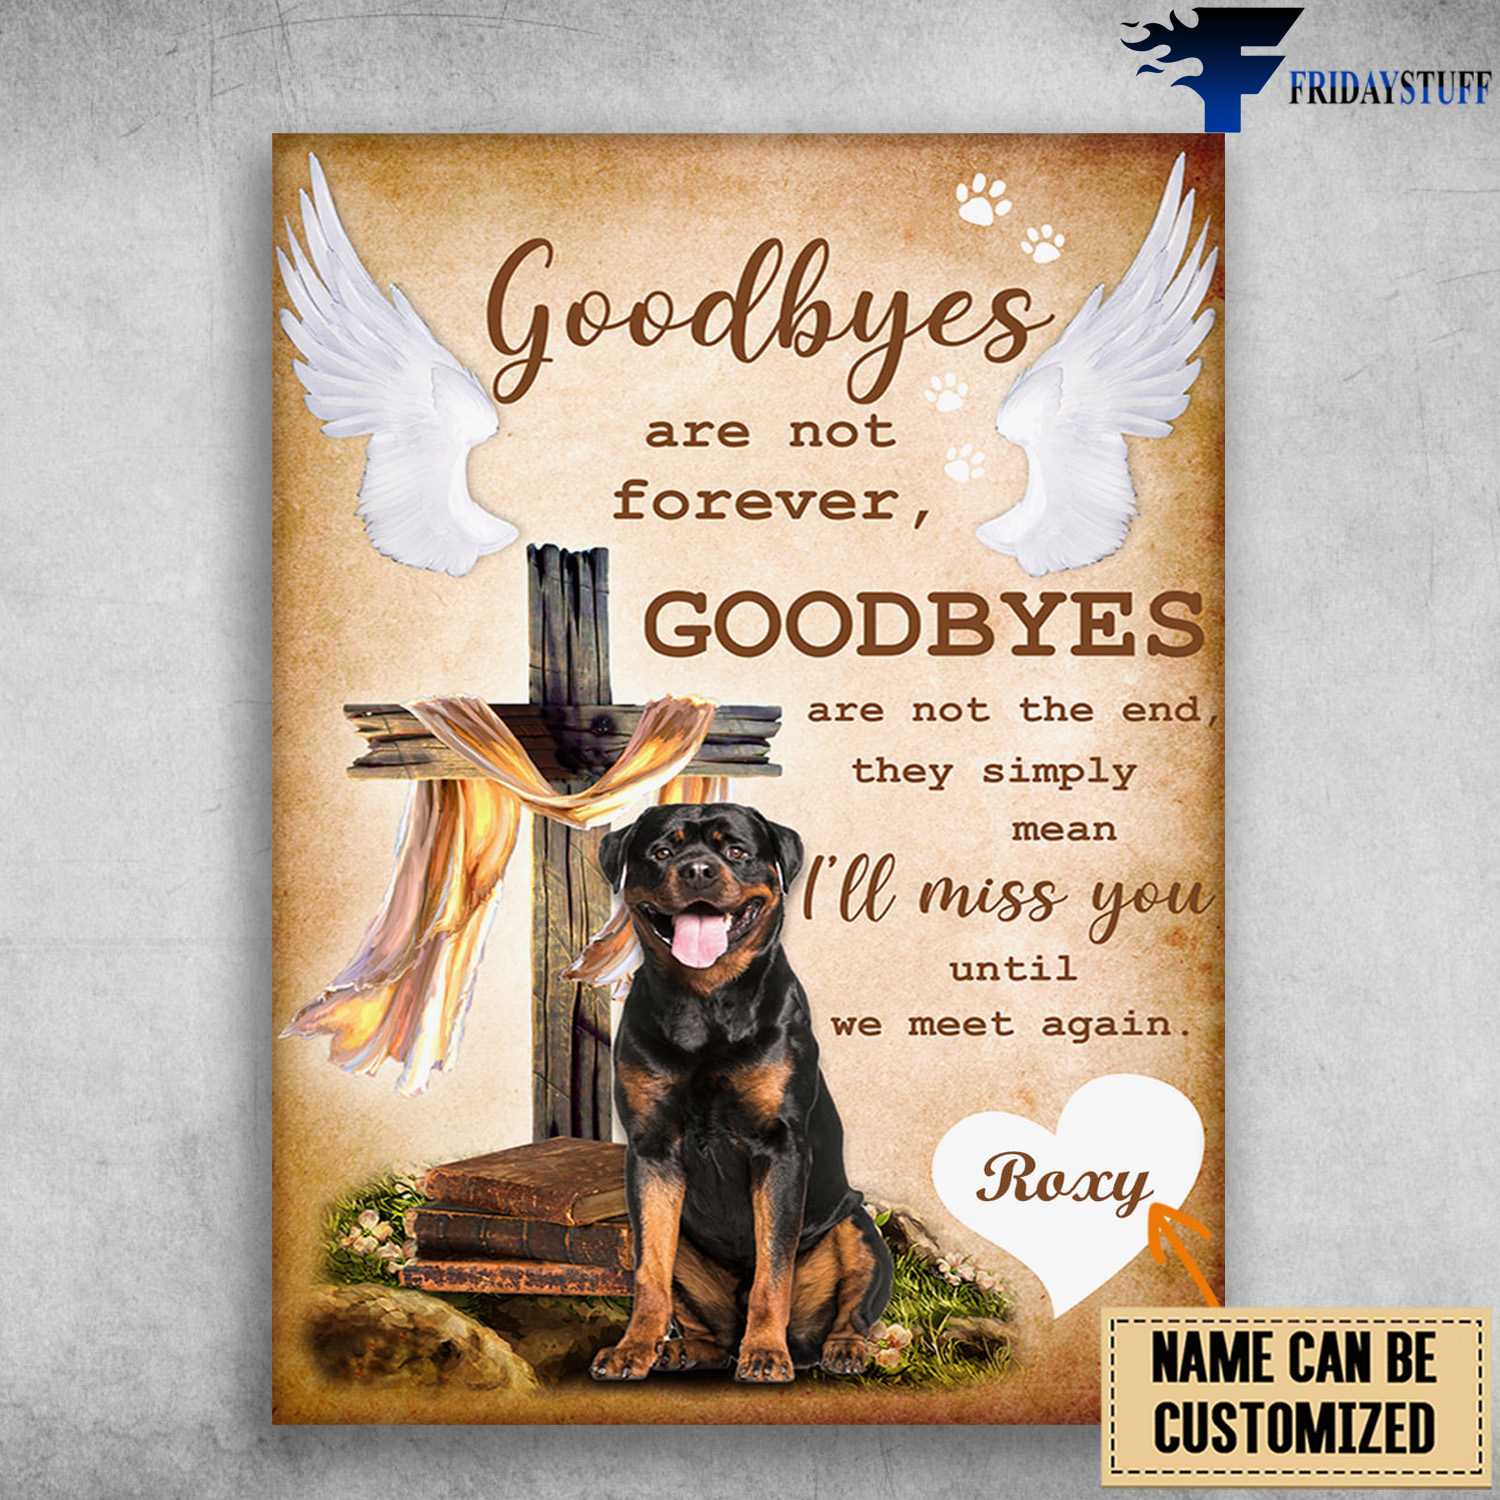 Rottweiler Dog, Goodbyes Are Not Forever, Goodbyes Are Not The End, They Simply Mean, I'll Miss You, Until We Meet Again